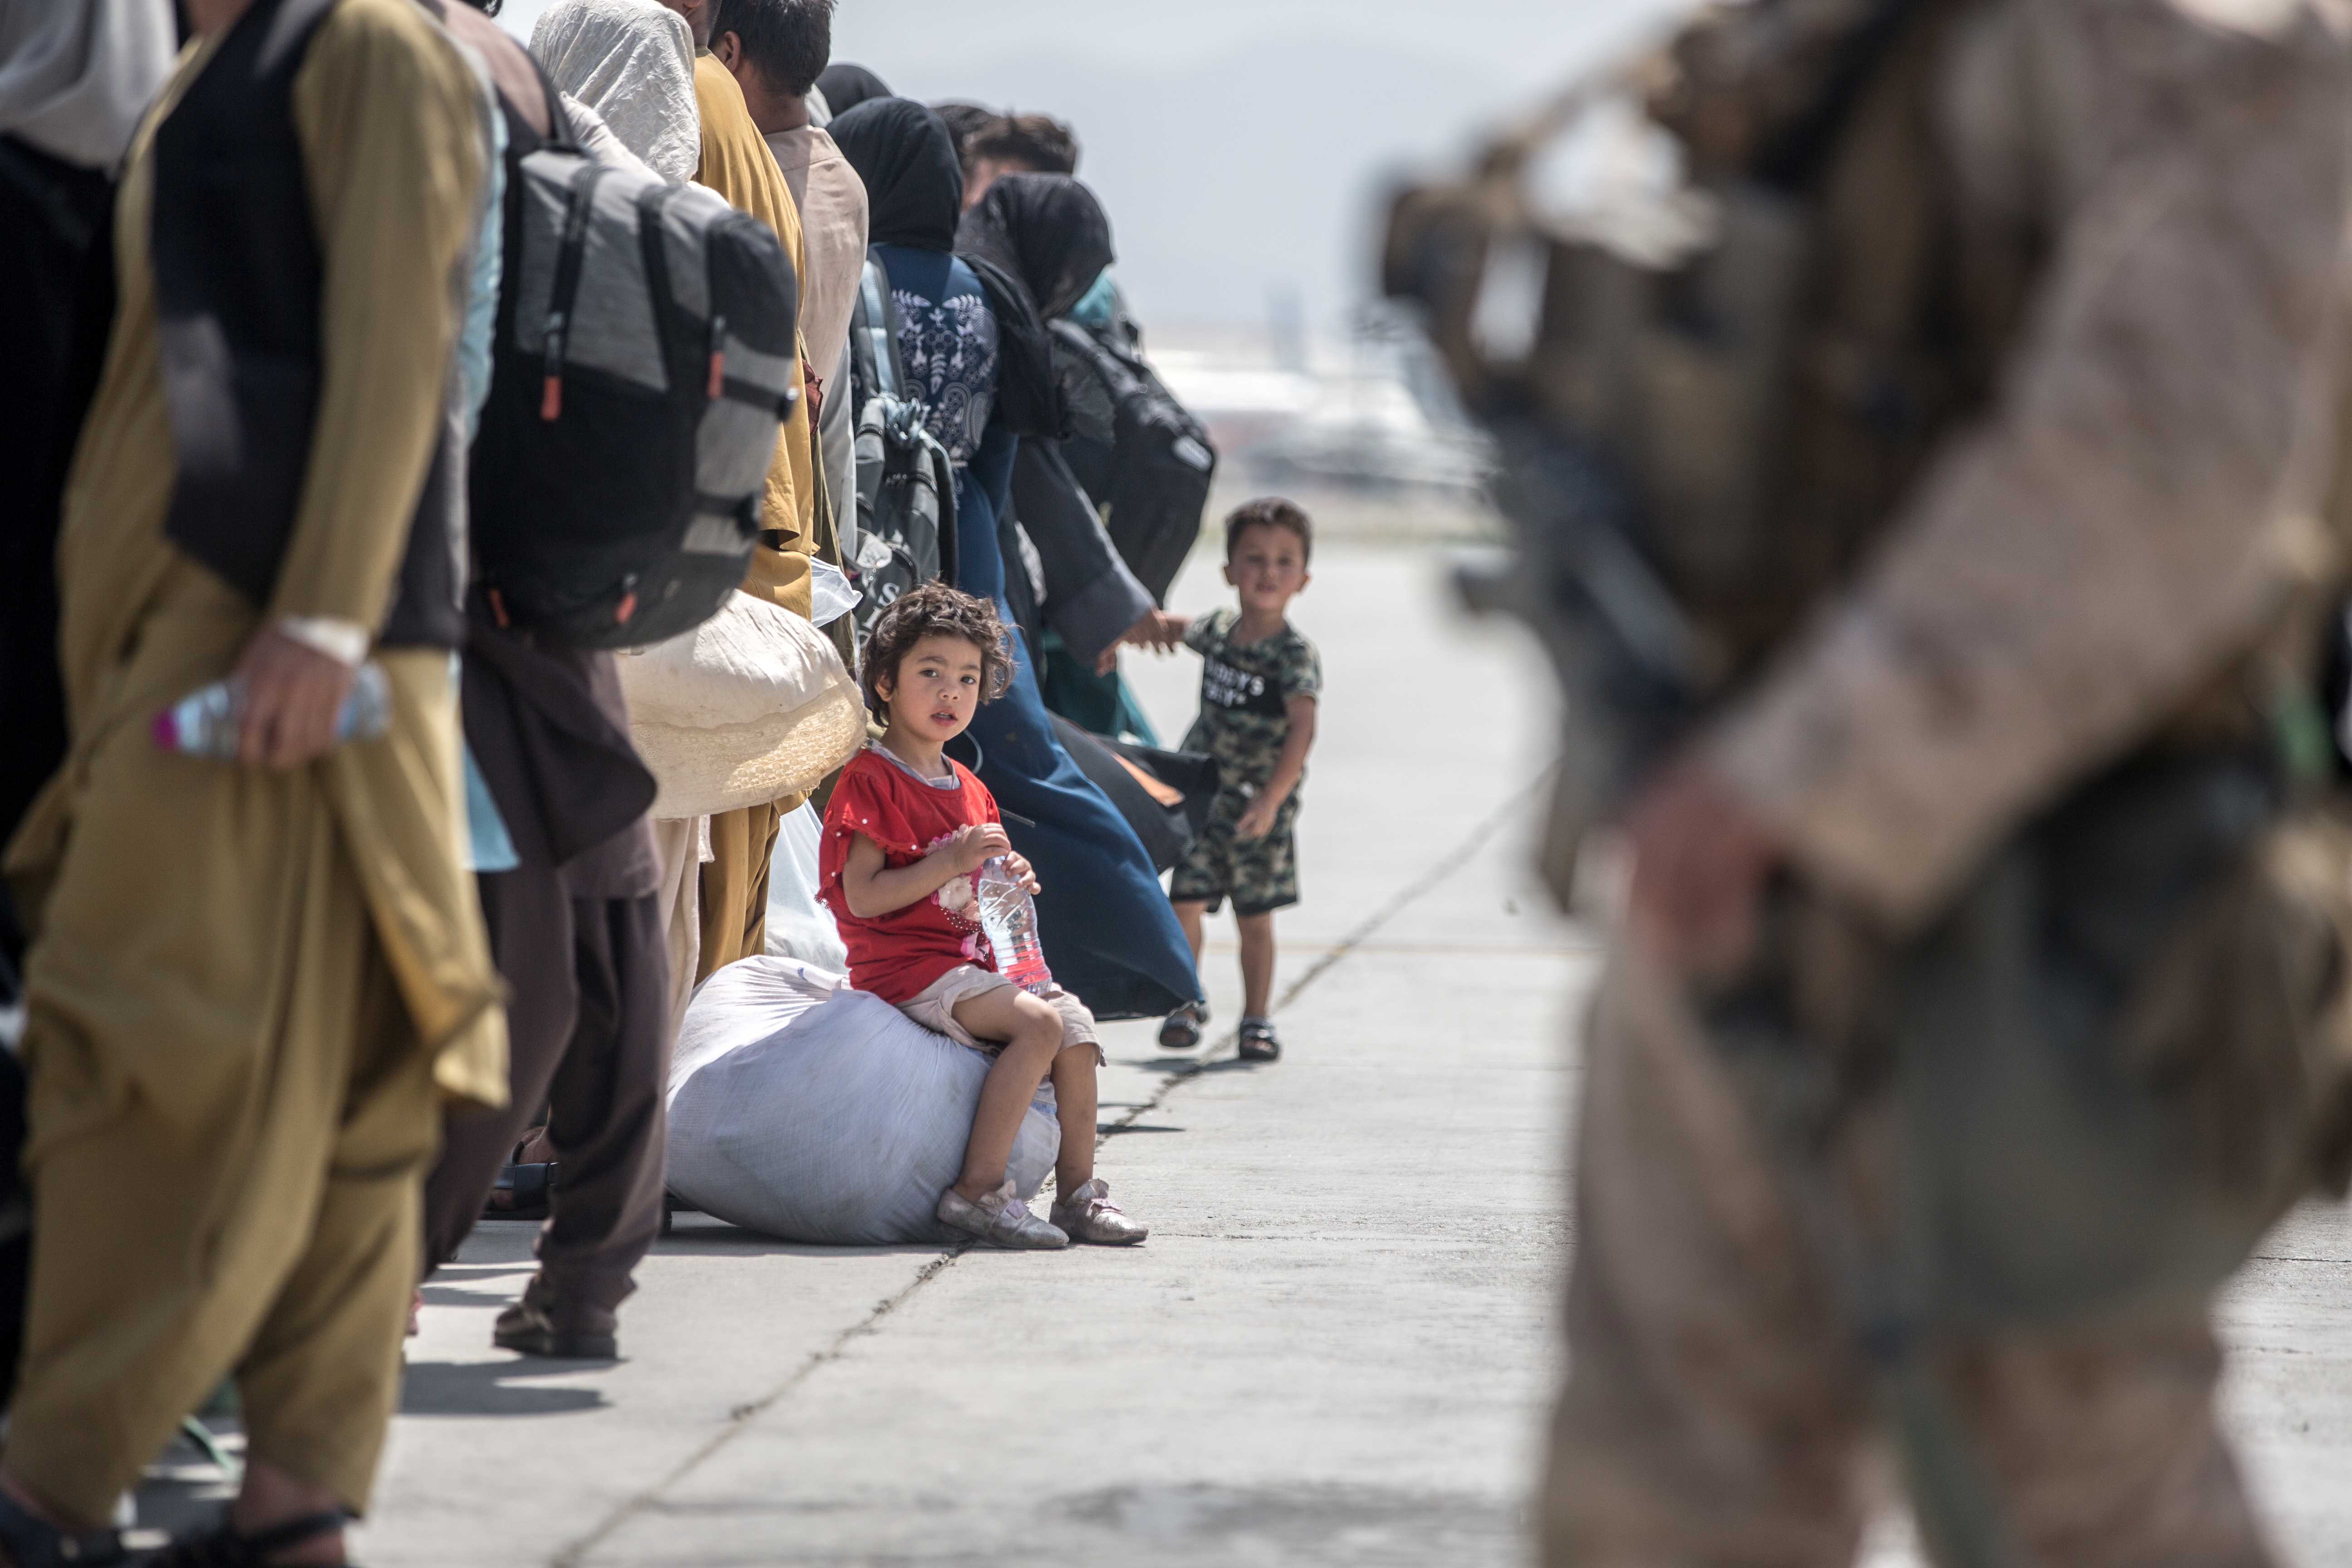 A child waits with her family to board a U.S. Air Force Boeing C-17 Globemaster III during an evacuation at Hamid Karzai International Airport, Afghanistan, August 22, 2021. U.S. Marine Corps/Sgt. Samuel Ruiz/Handout via REUTERS